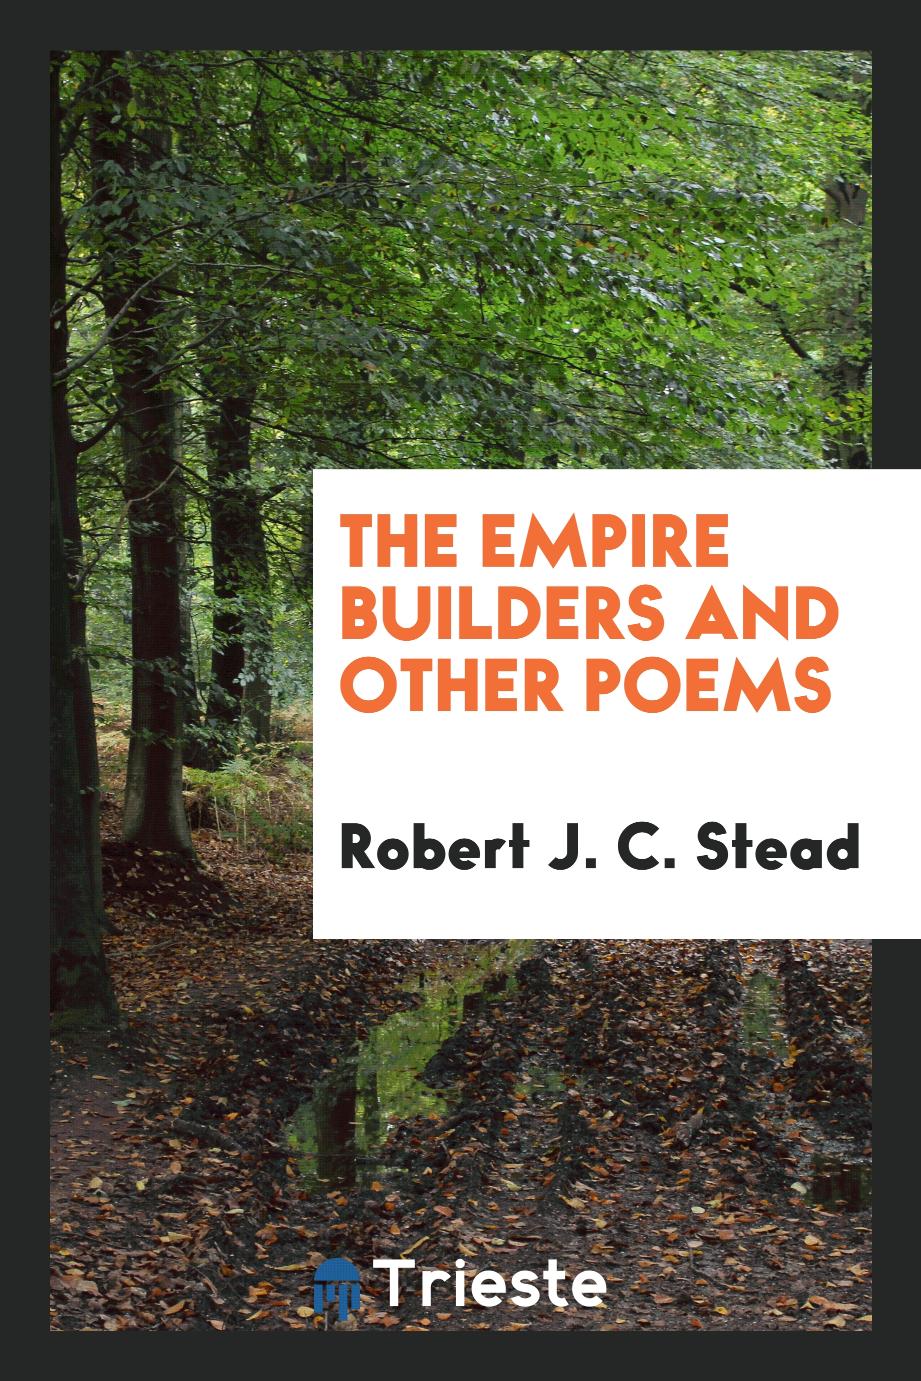 The Empire Builders and Other Poems